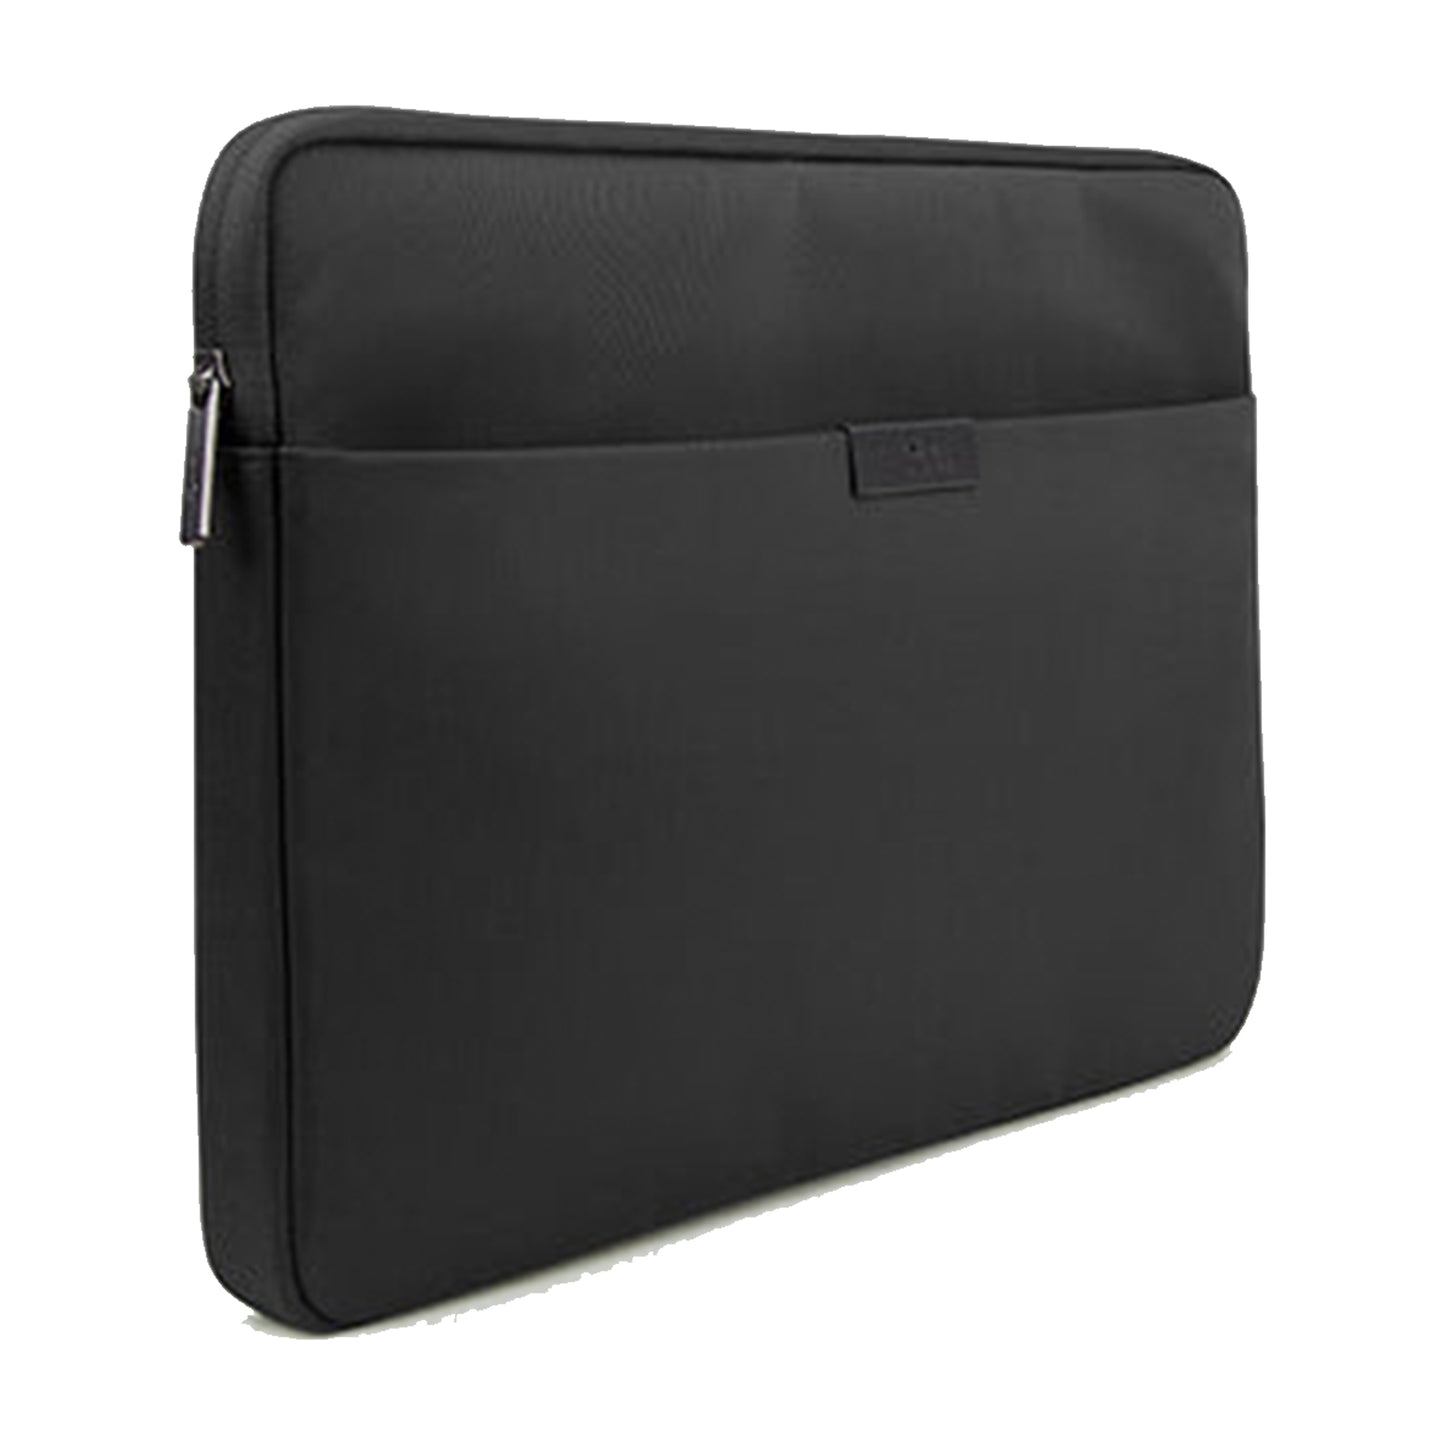 UNIQ Bergen Protective Nylon Laptop Sleeve for MacBook and Laptops Up to 16" - Midnight Black ( Barcode: 8886463680711 )